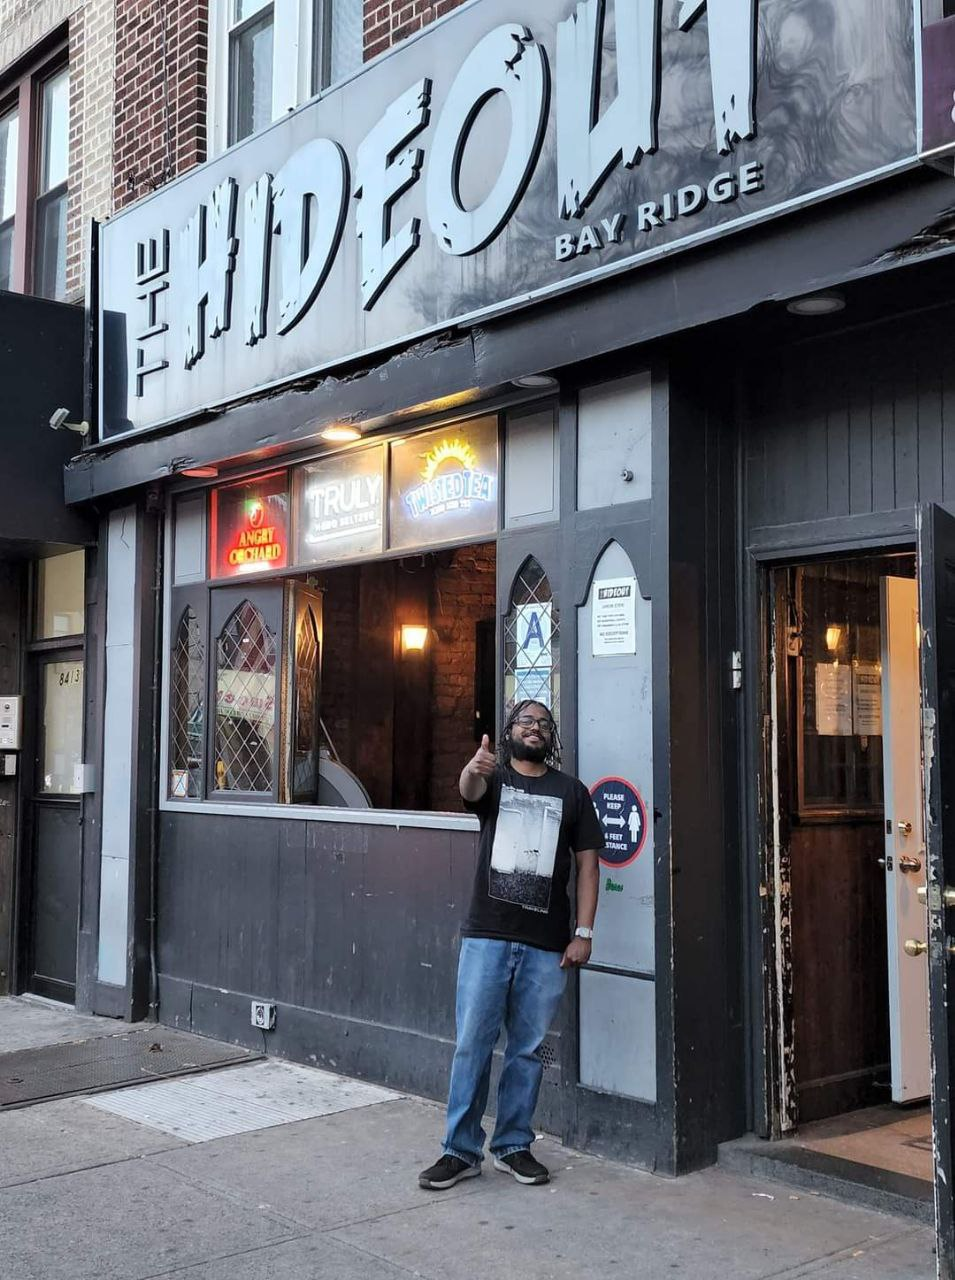 Music Was Here: Dial Drive, Curly @ The Hideout (or who knew Bay-Ridge could be fun)